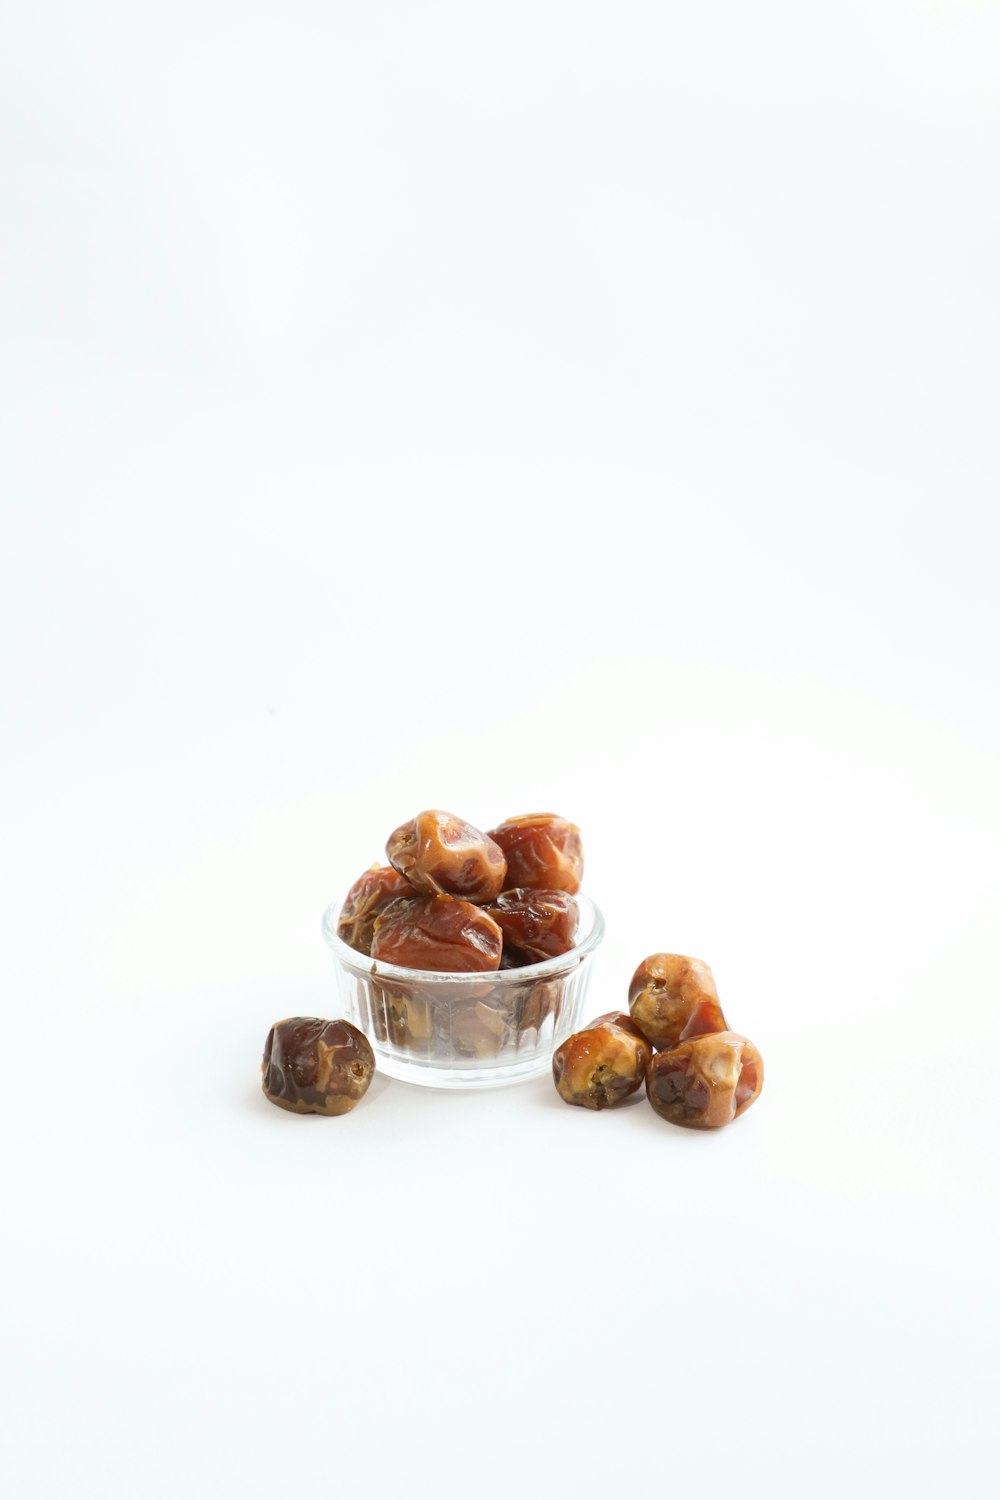 a glass bowl filled with raisins on top of a white table